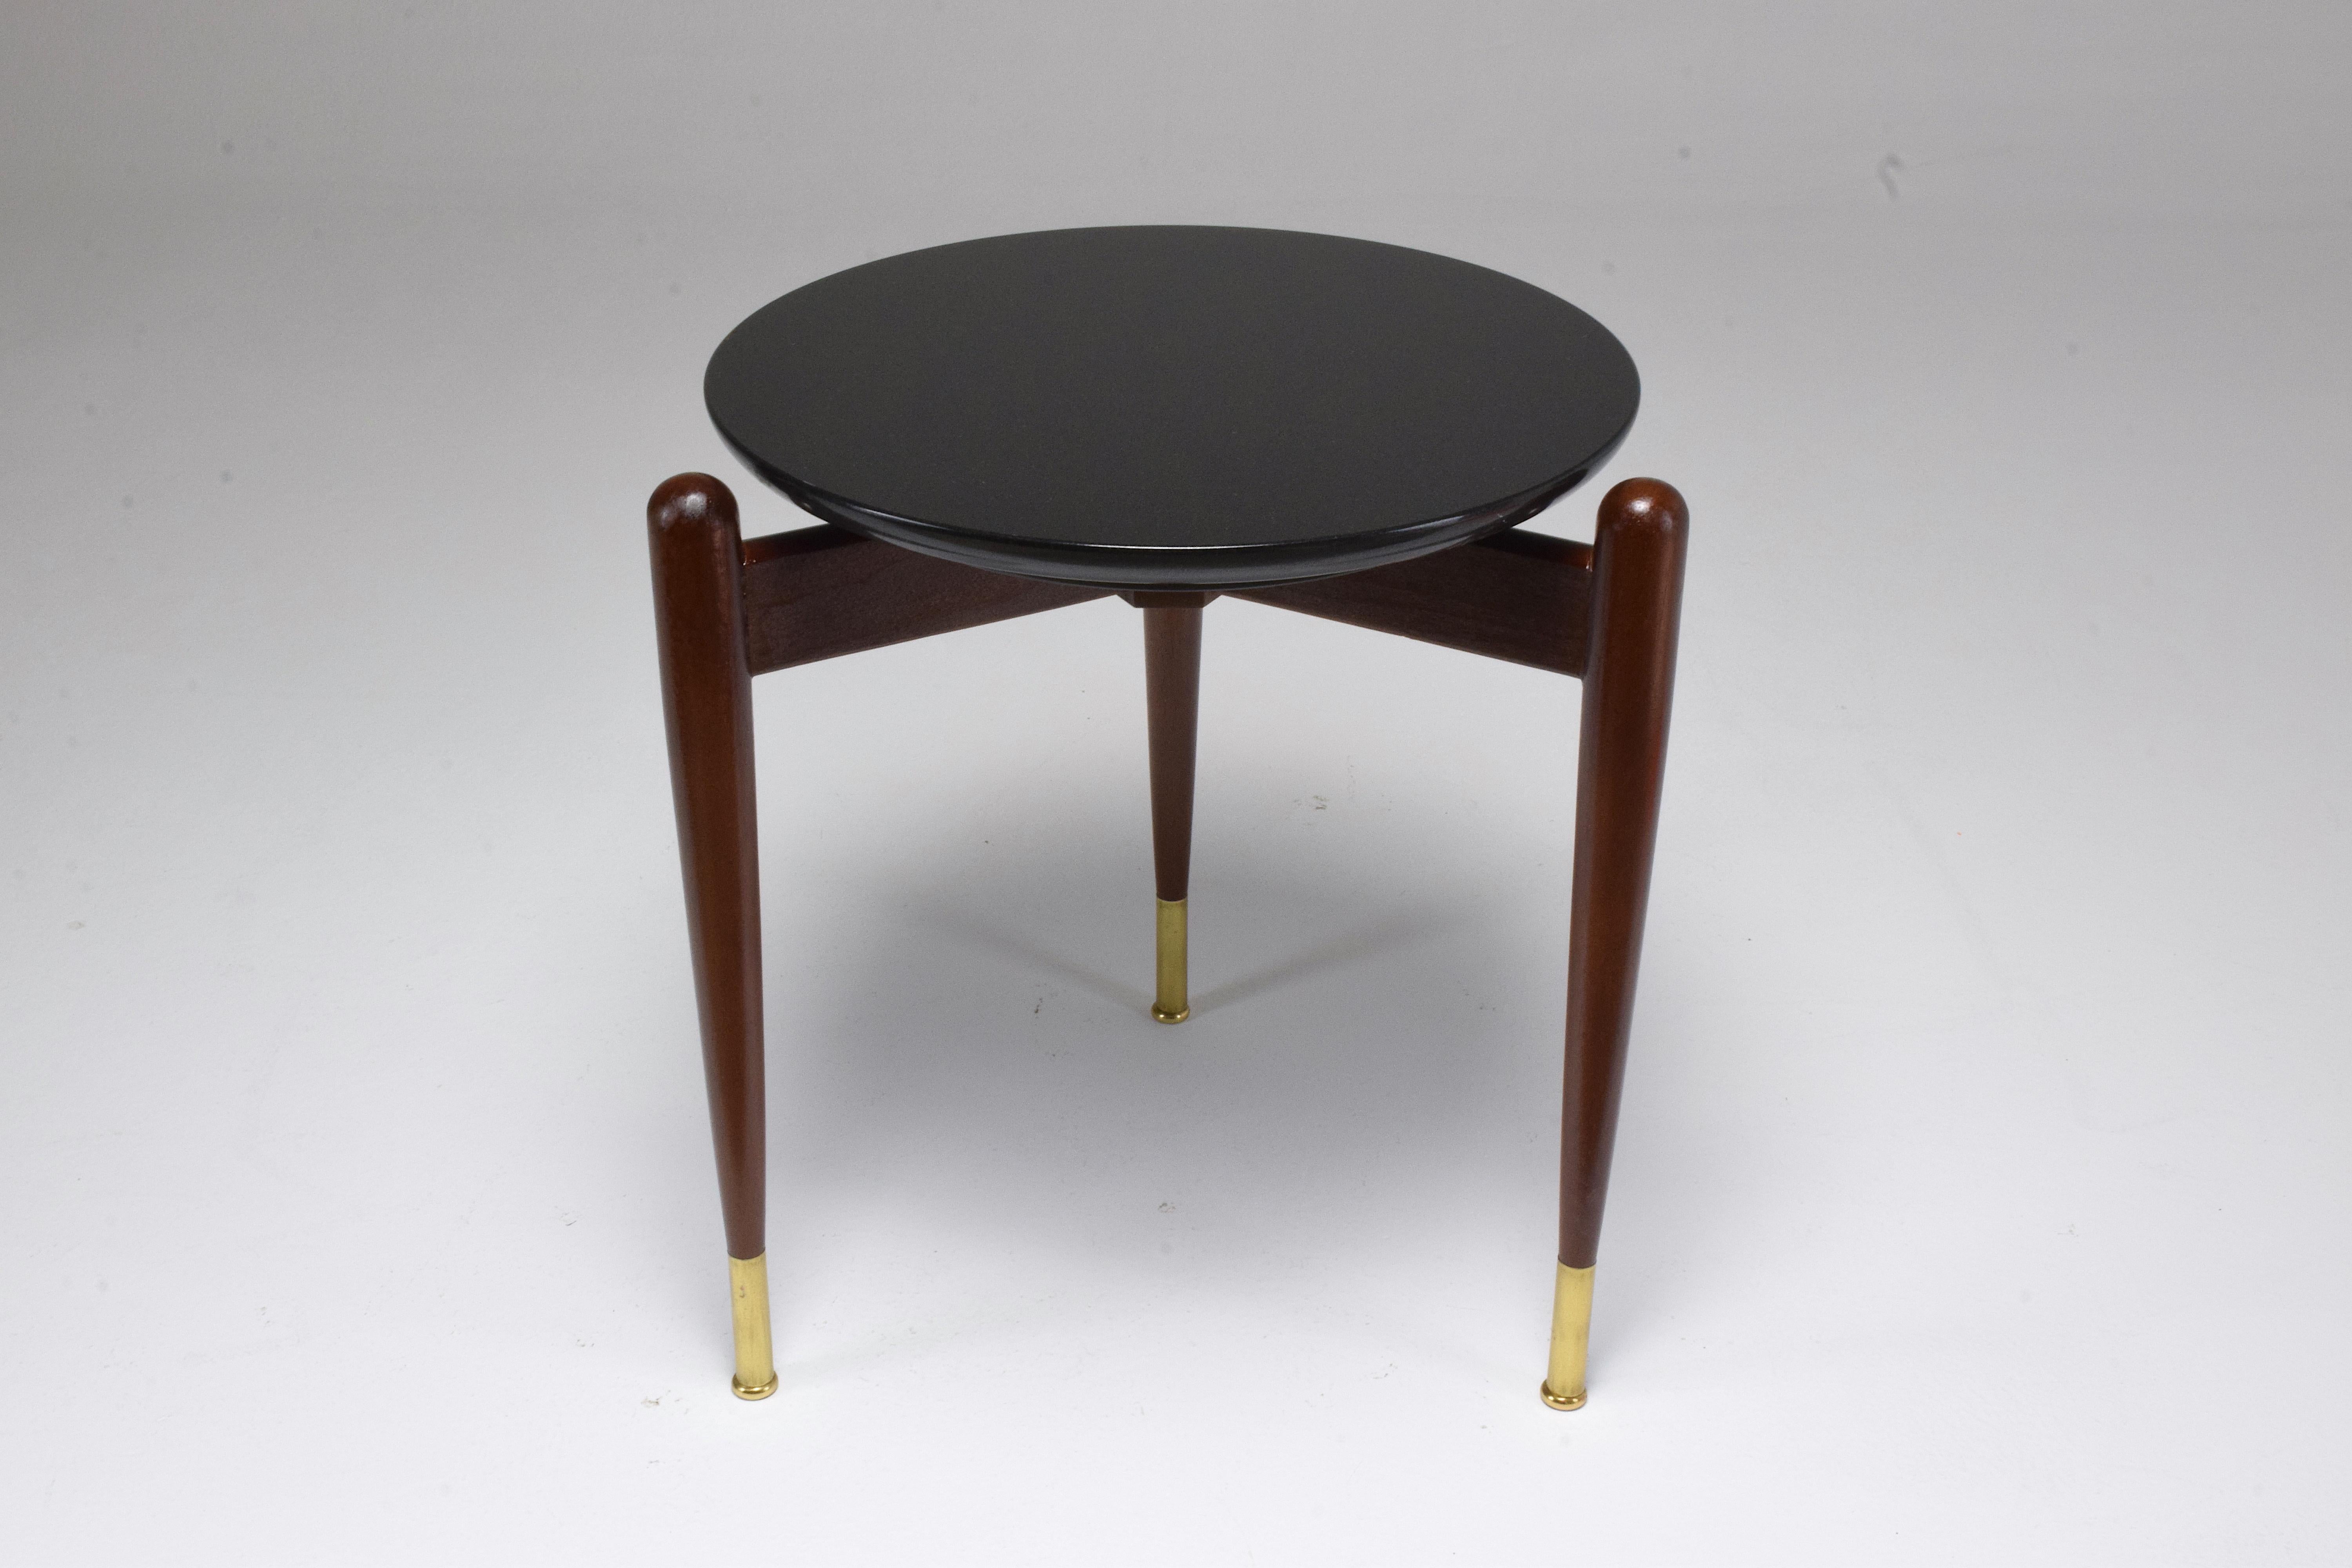 20th century vintage small gueridon table composed of a wooden structure with tapered legs, brass polished endings and a black granite tabletop.
Restored condition.